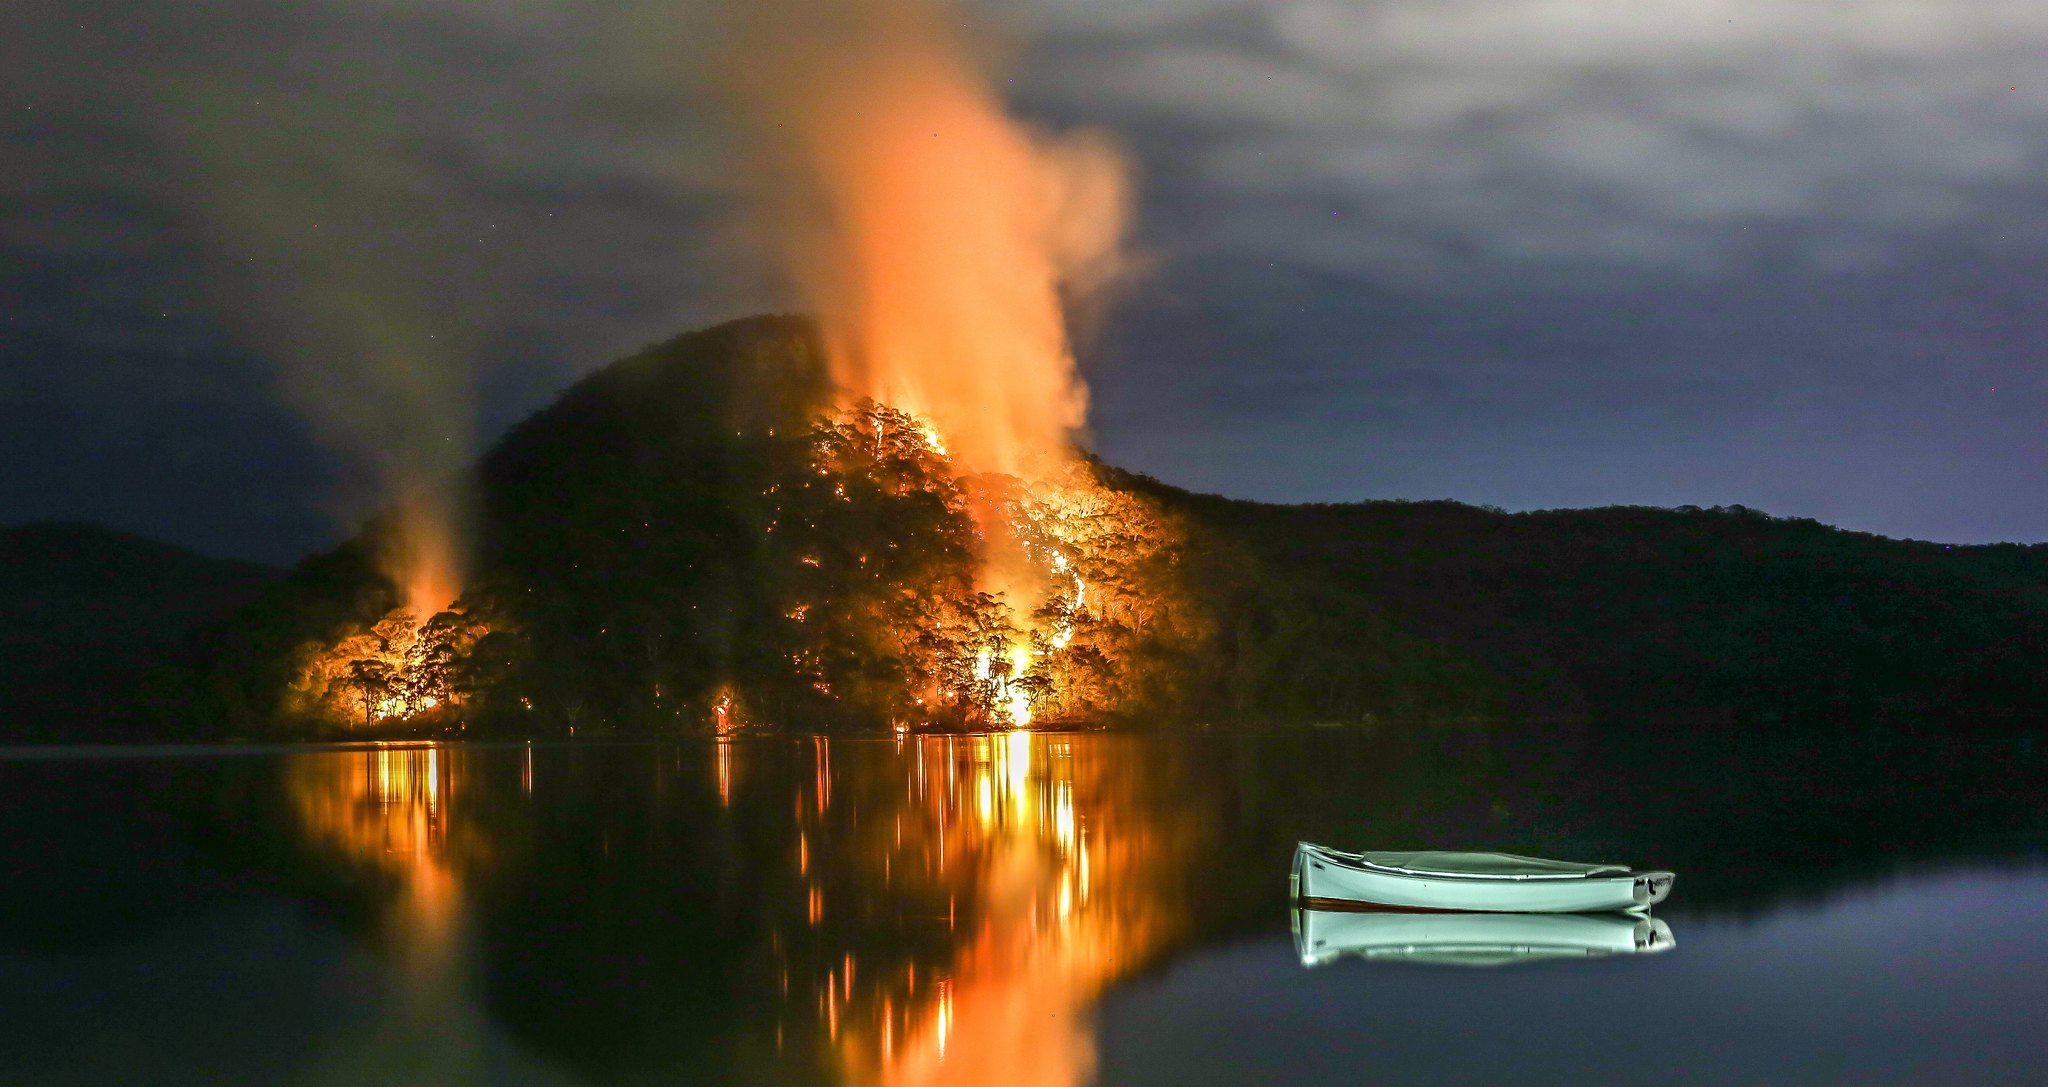 Bush Fires across Woy Woy Bay in New South Wales, Australia, Photo by Martin Snicer (CC BY-ND 2.0)